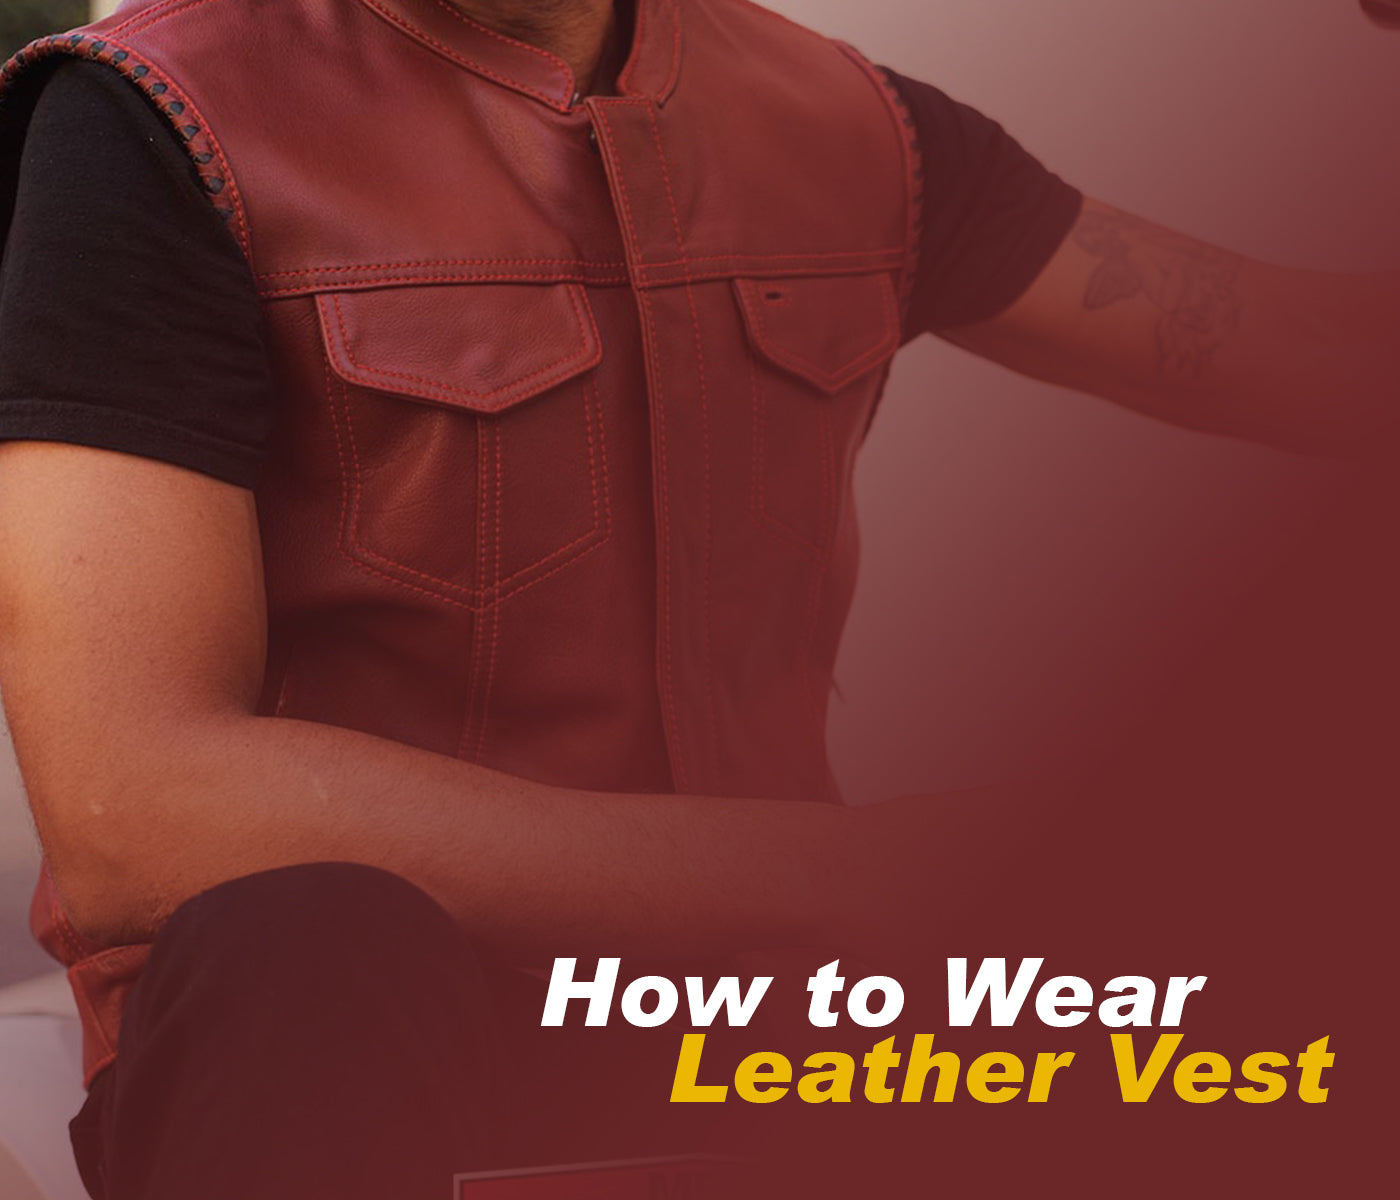 How to Wear Leather Vest?